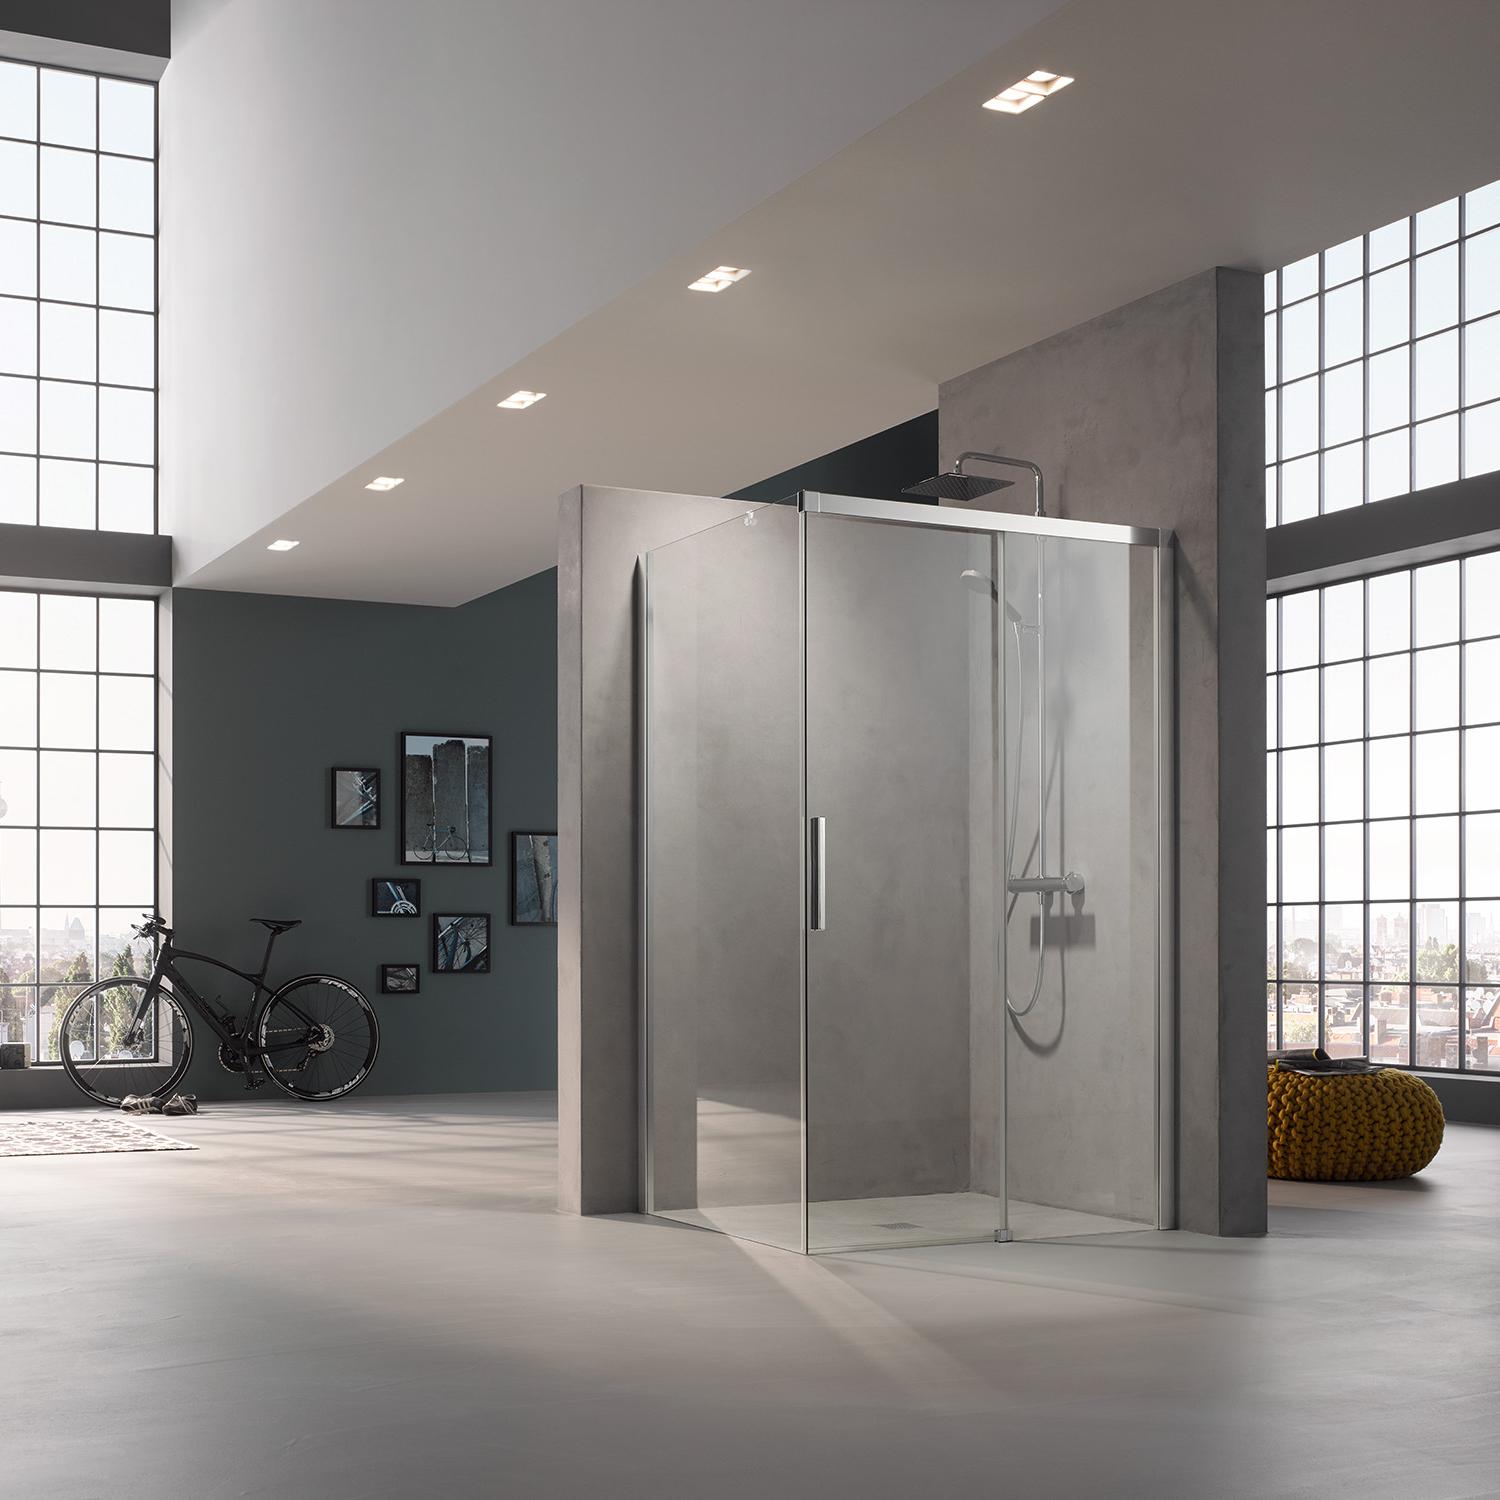 Kermi profile shower enclosure NICA off-floor two-part sliding door with fixed panel and wall profile